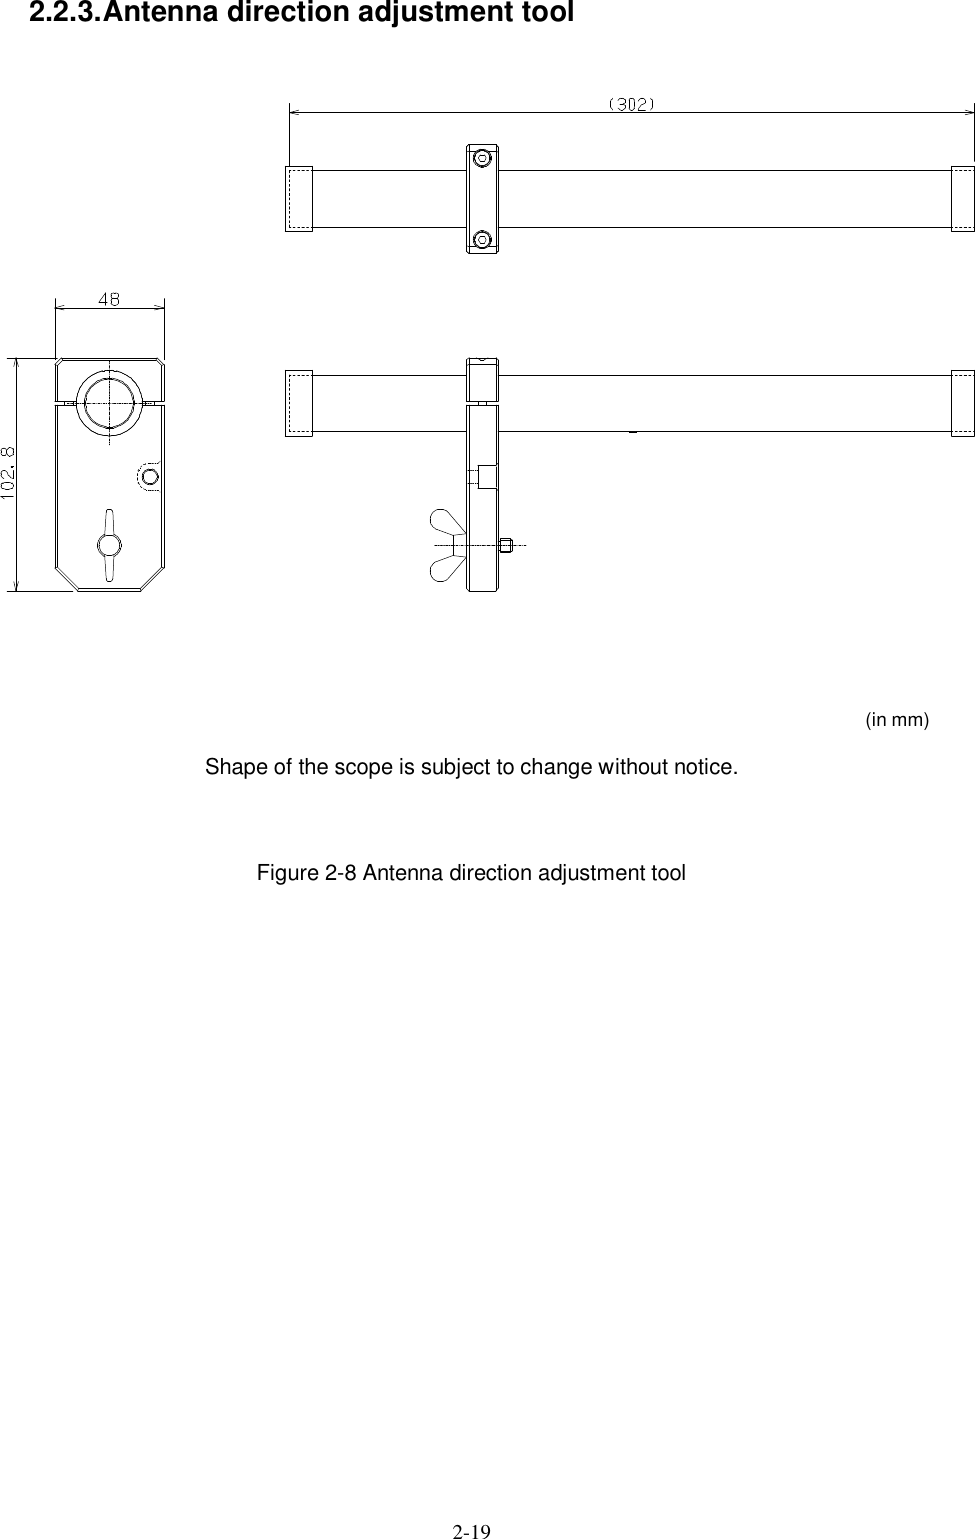  2-19   2.2.3. Antenna direction adjustment tool   (in mm) Shape of the scope is subject to change without notice.  Figure 2-8 Antenna direction adjustment tool  